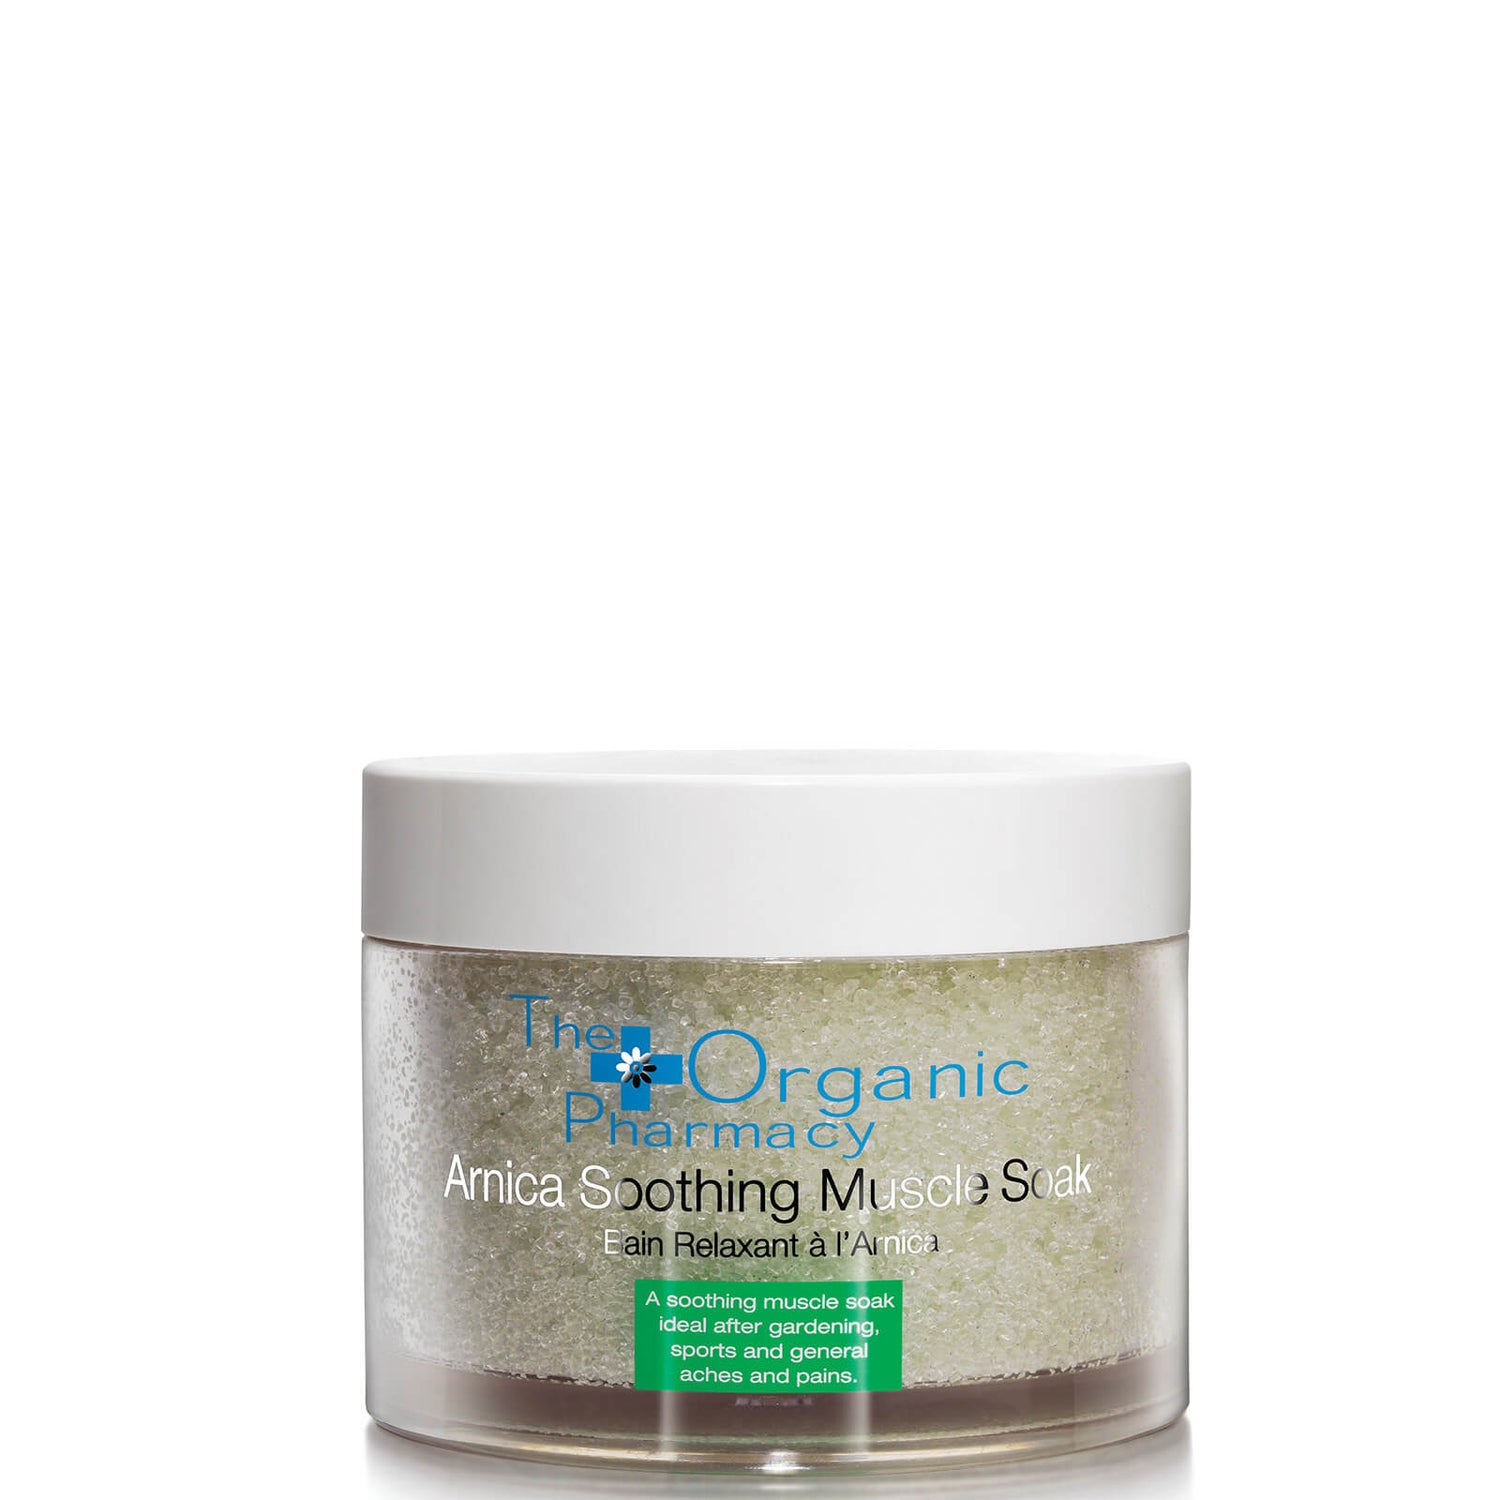 The Organic Pharmacy Arnica Soothing Muscle Soak 325 g.